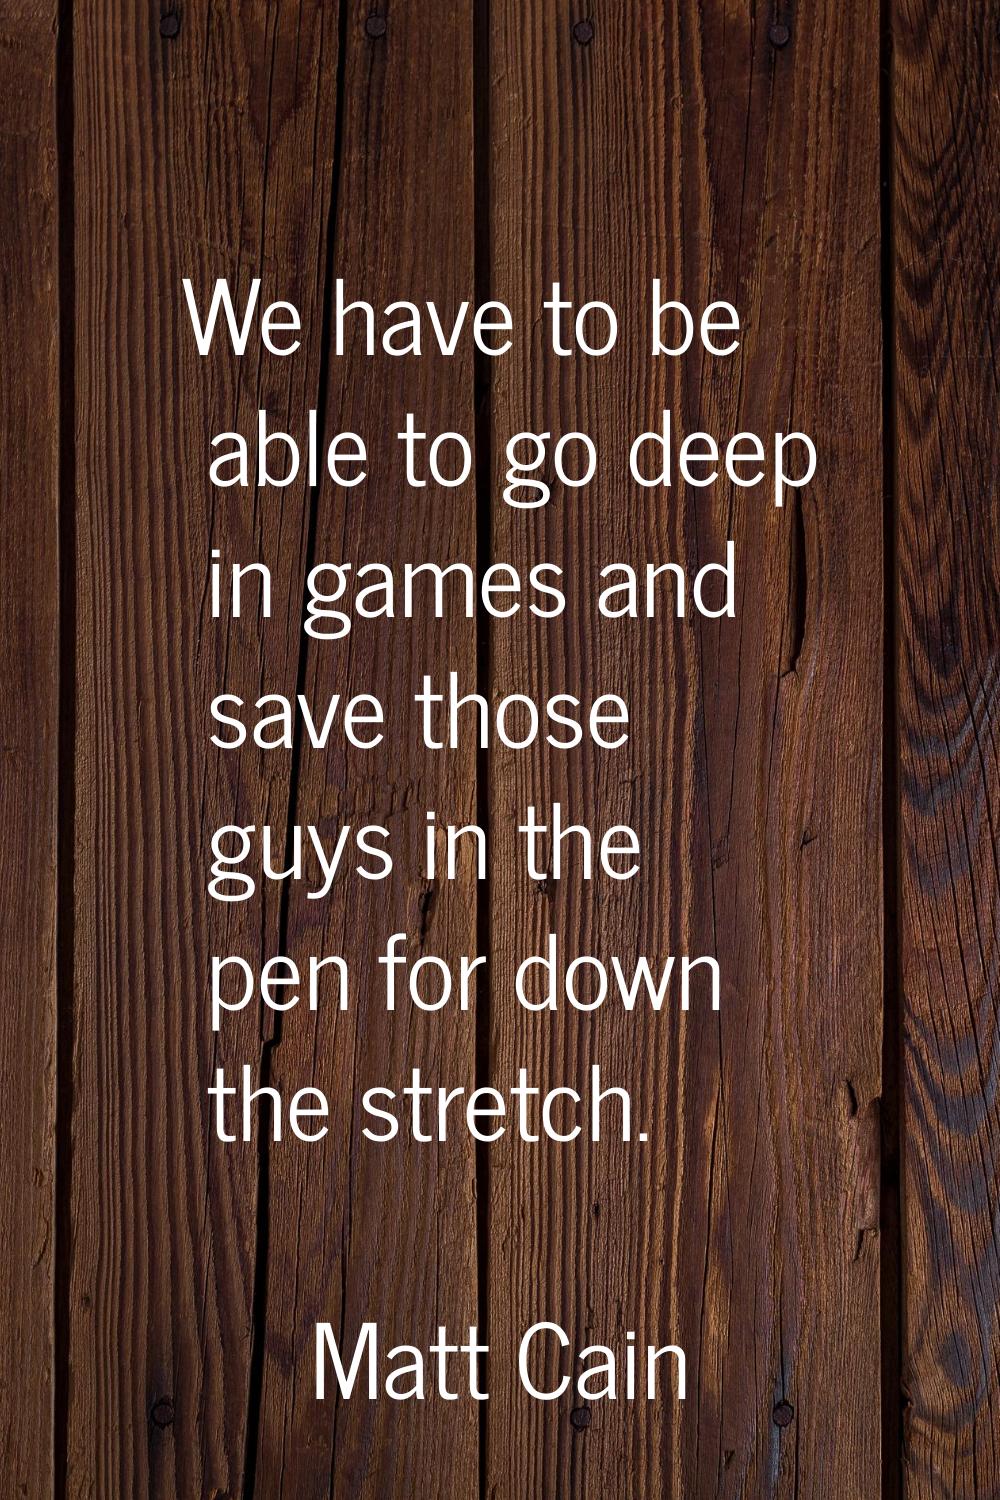 We have to be able to go deep in games and save those guys in the pen for down the stretch.